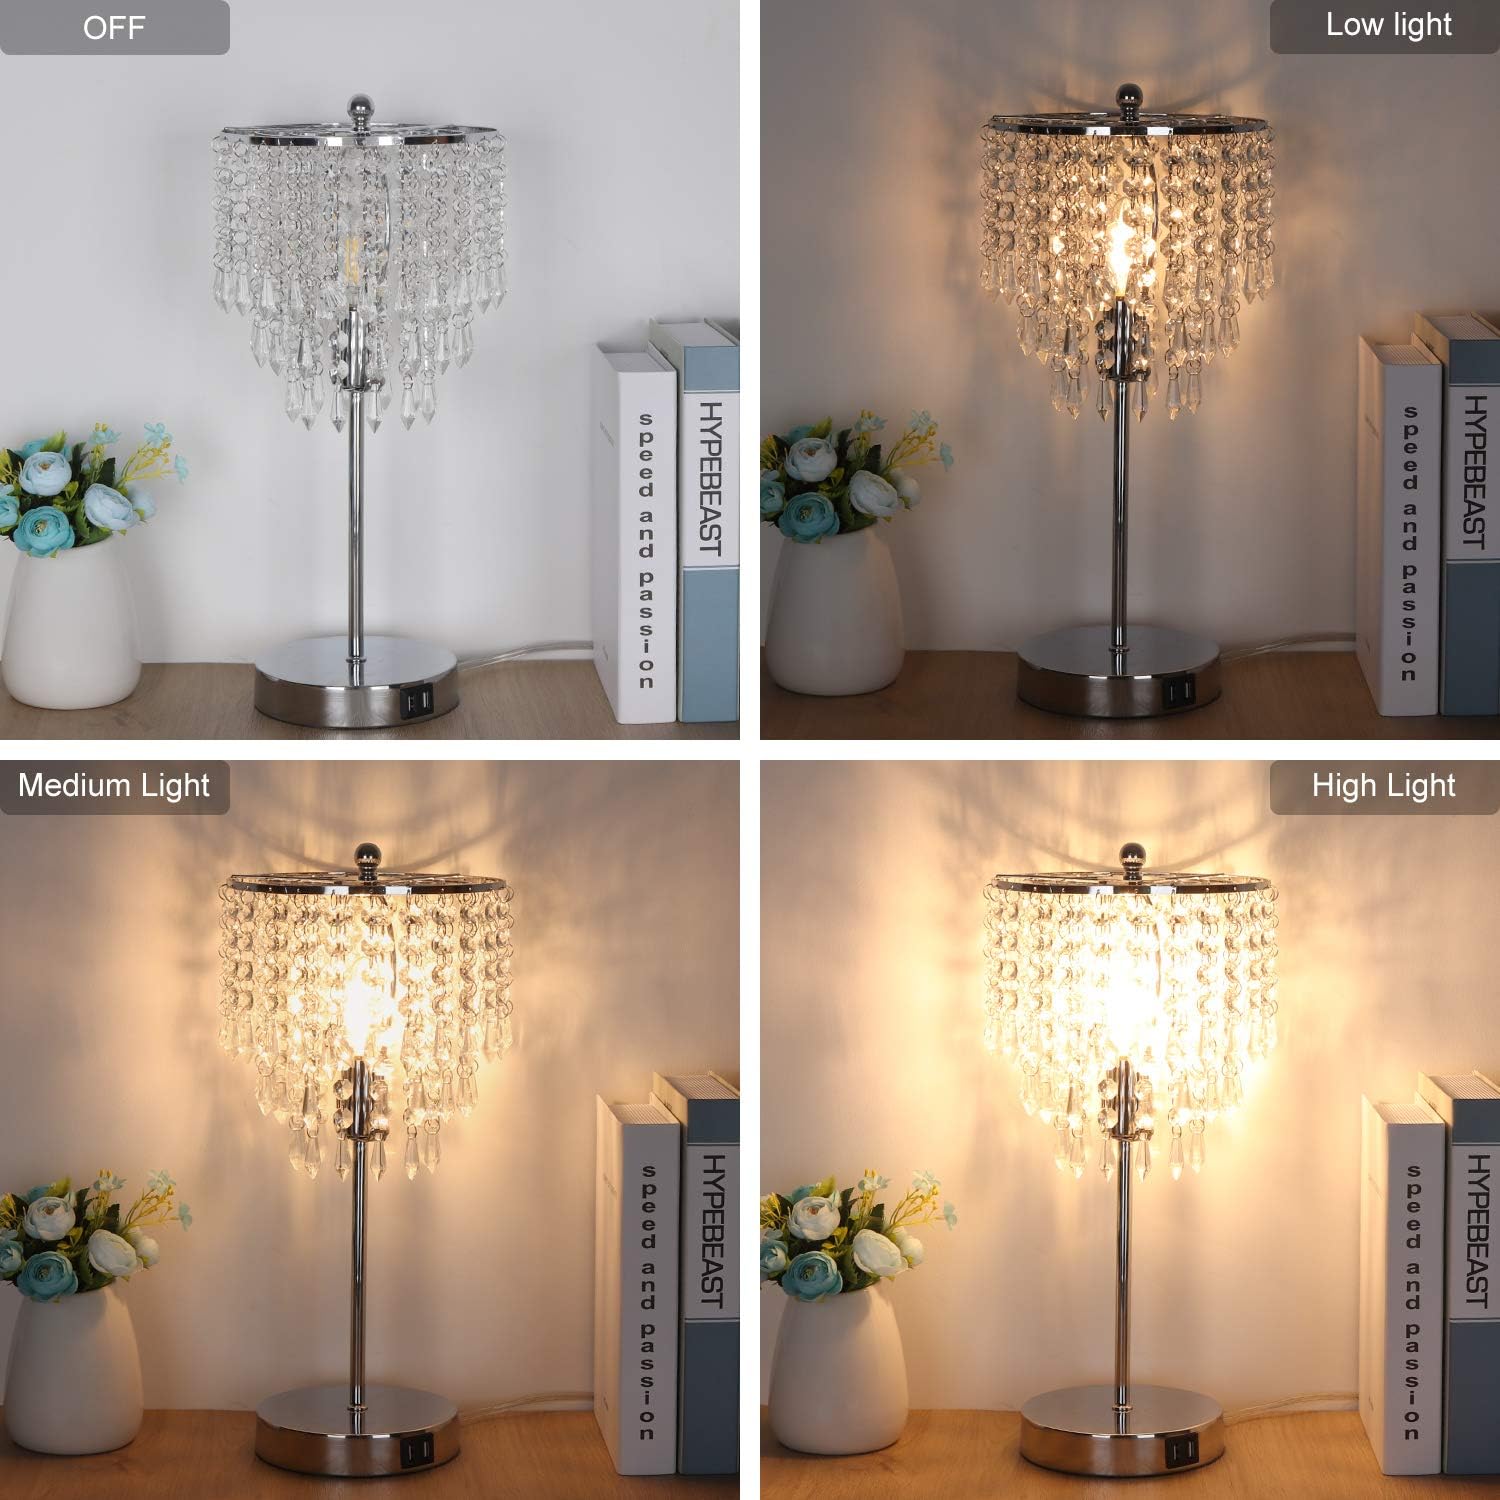 Seaside Village Touch Control Crystal, Touch Control Crystal Table Lamp With Usb Port